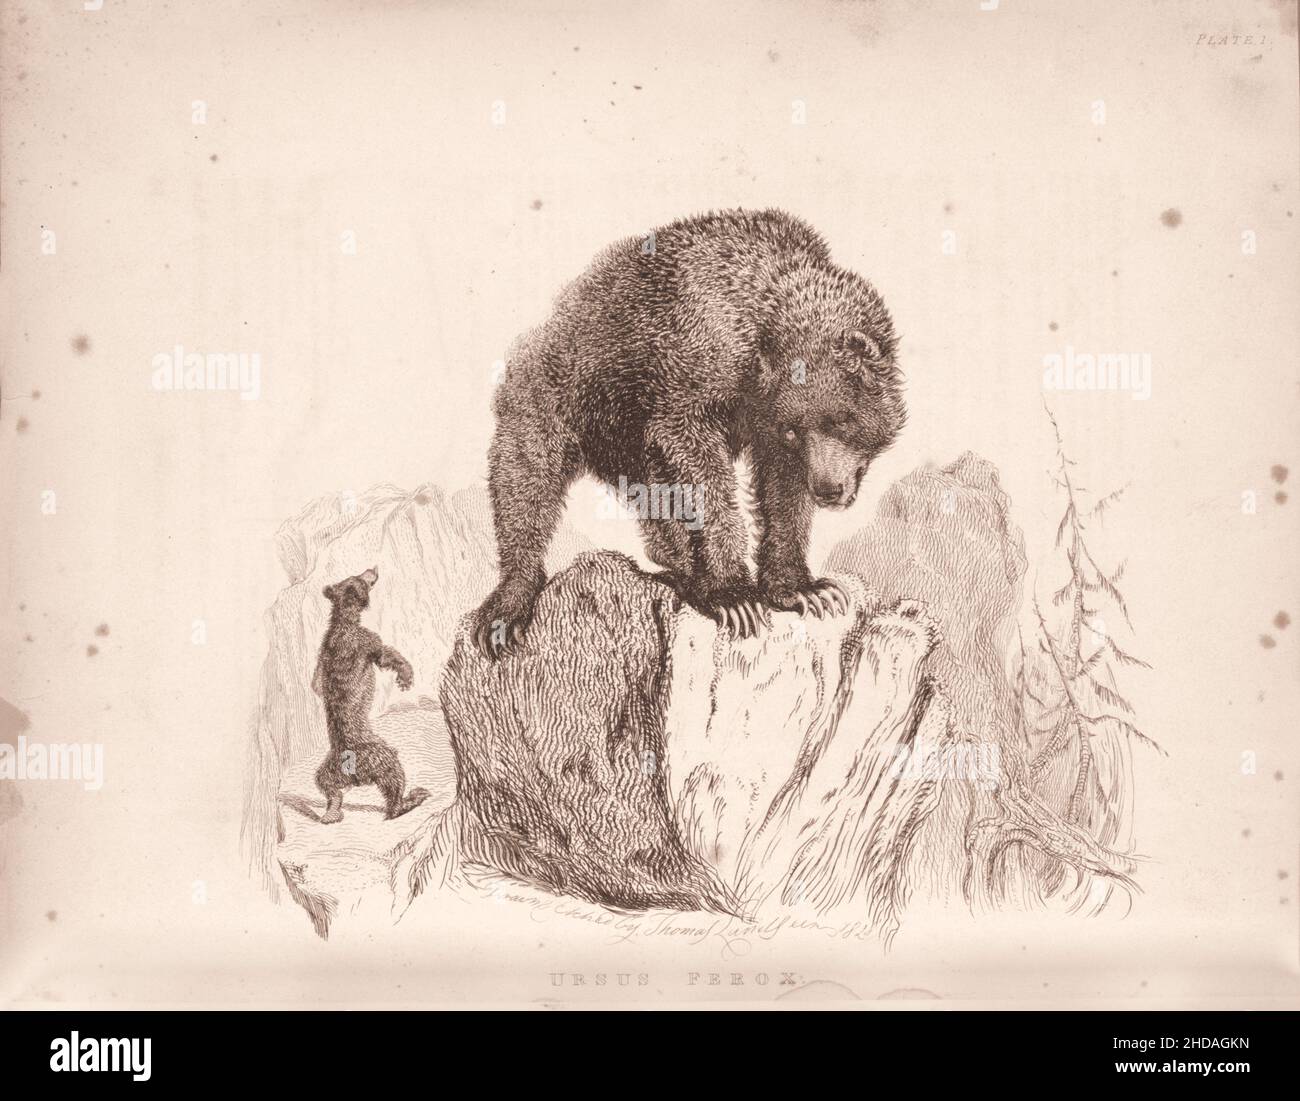 Vintage (drawing) etching of grisly bear (Ursus ferox). 1829-1837, by J. Murray (Publisher) Stock Photo